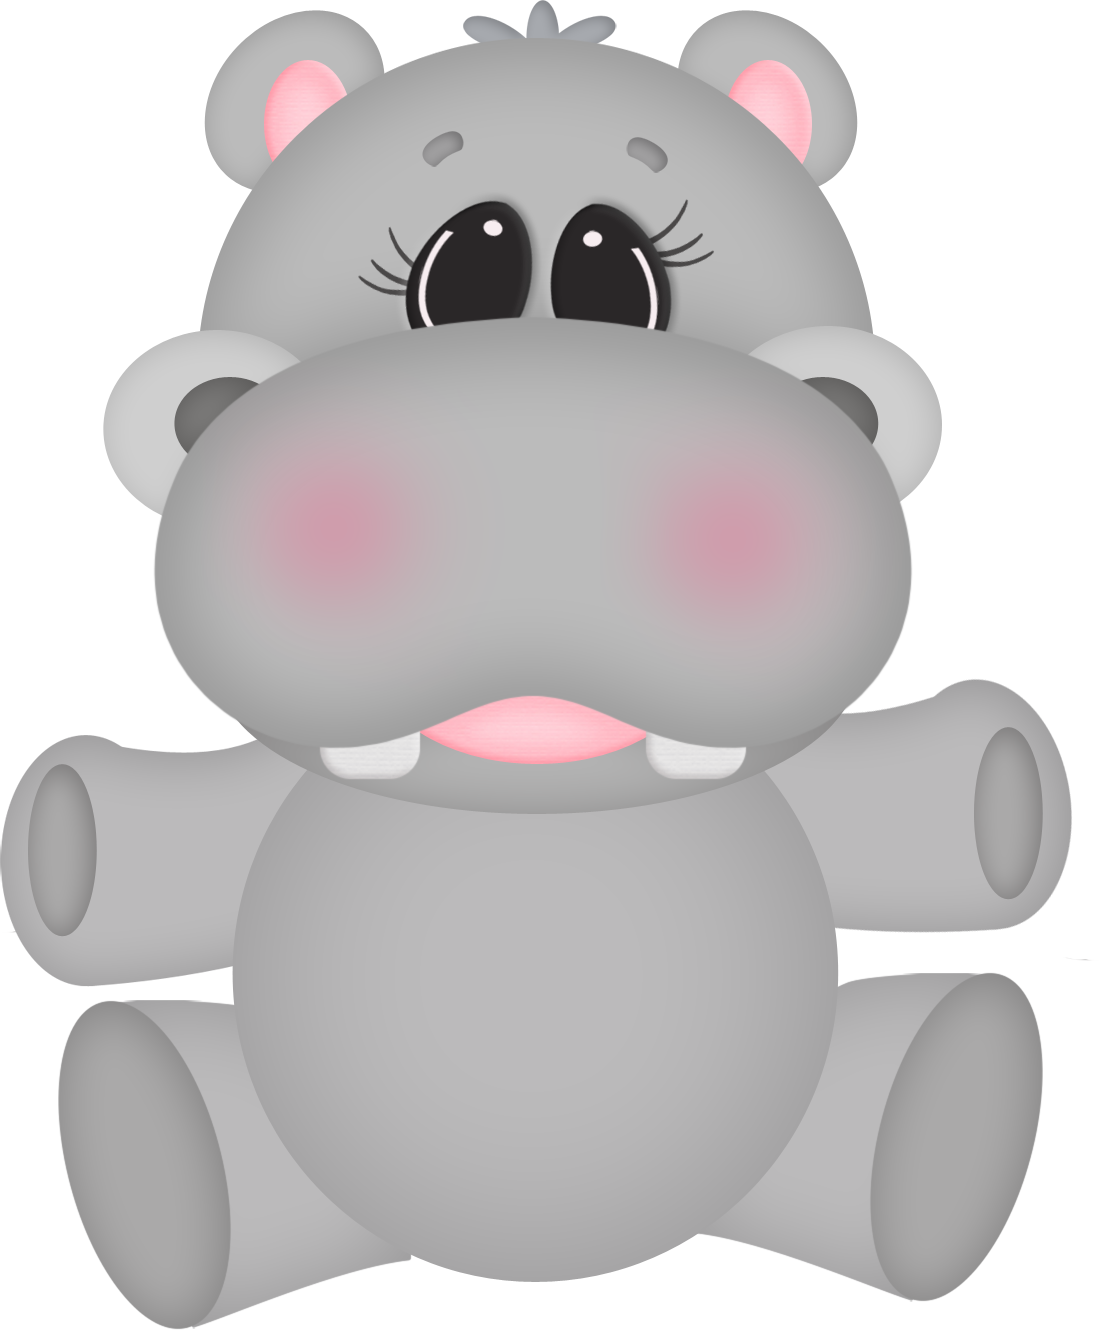 Hippo Clip Art - Bebes Animales Animados - Png Download (1099x1330), Png Download